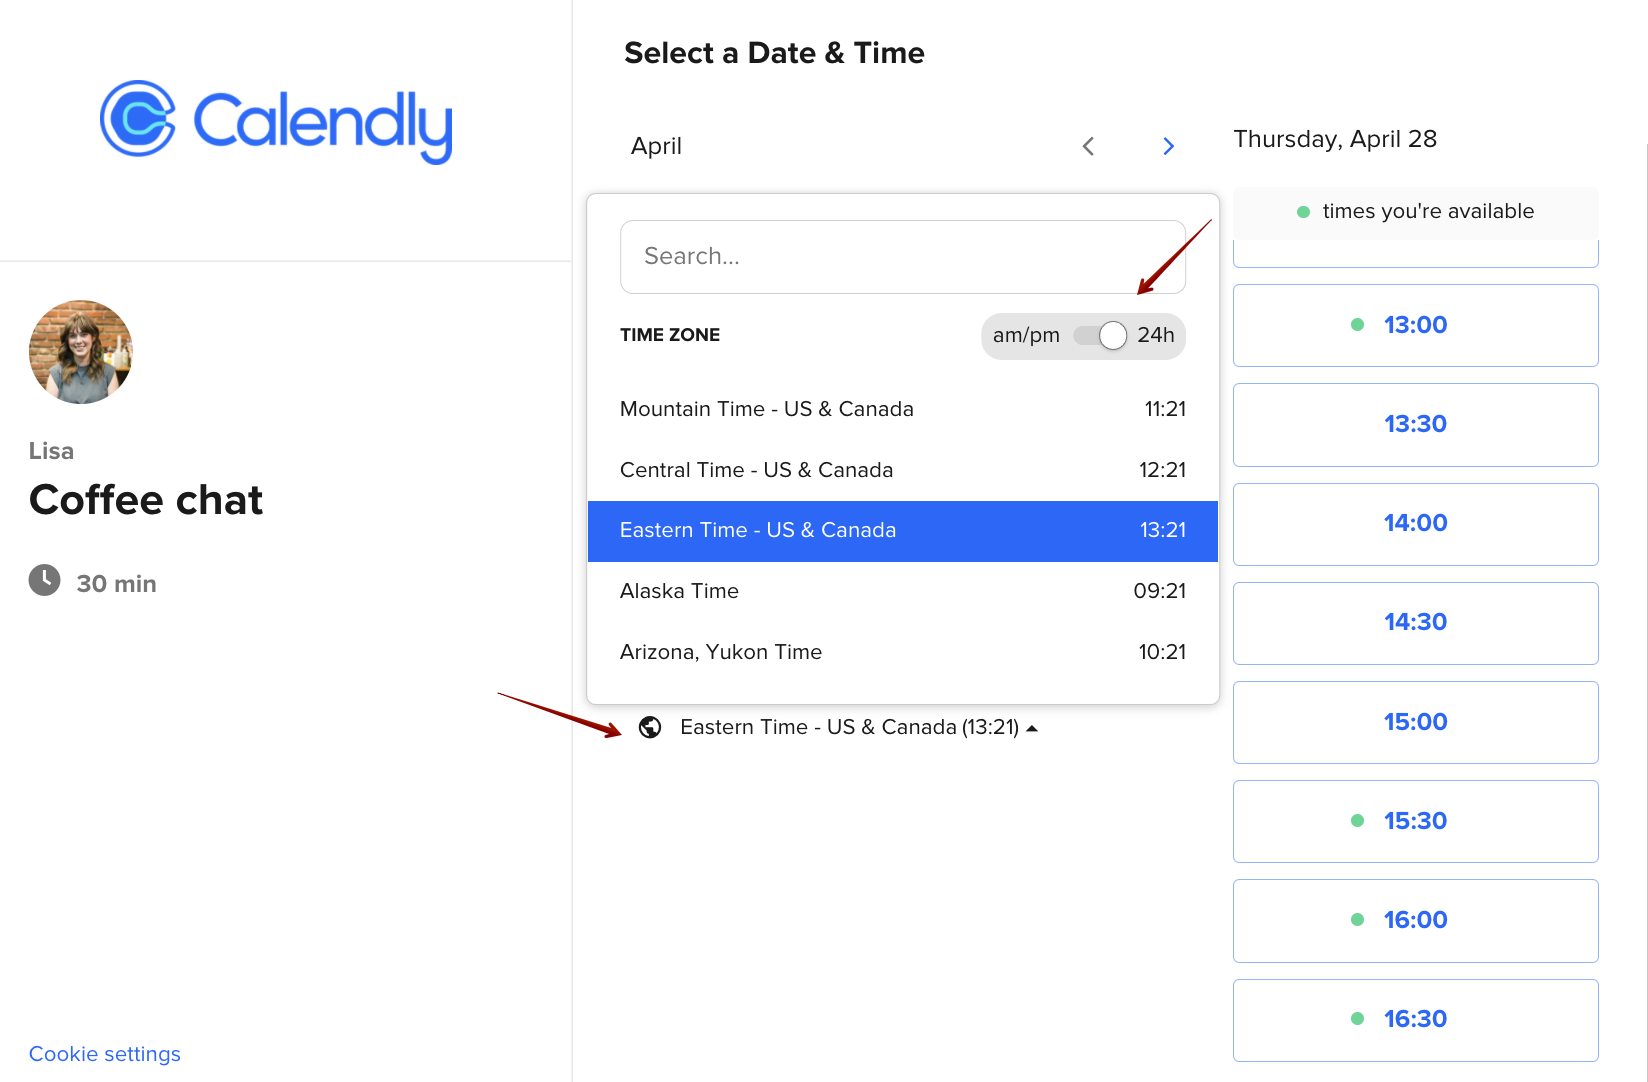 Schedule your meetings with Calendly